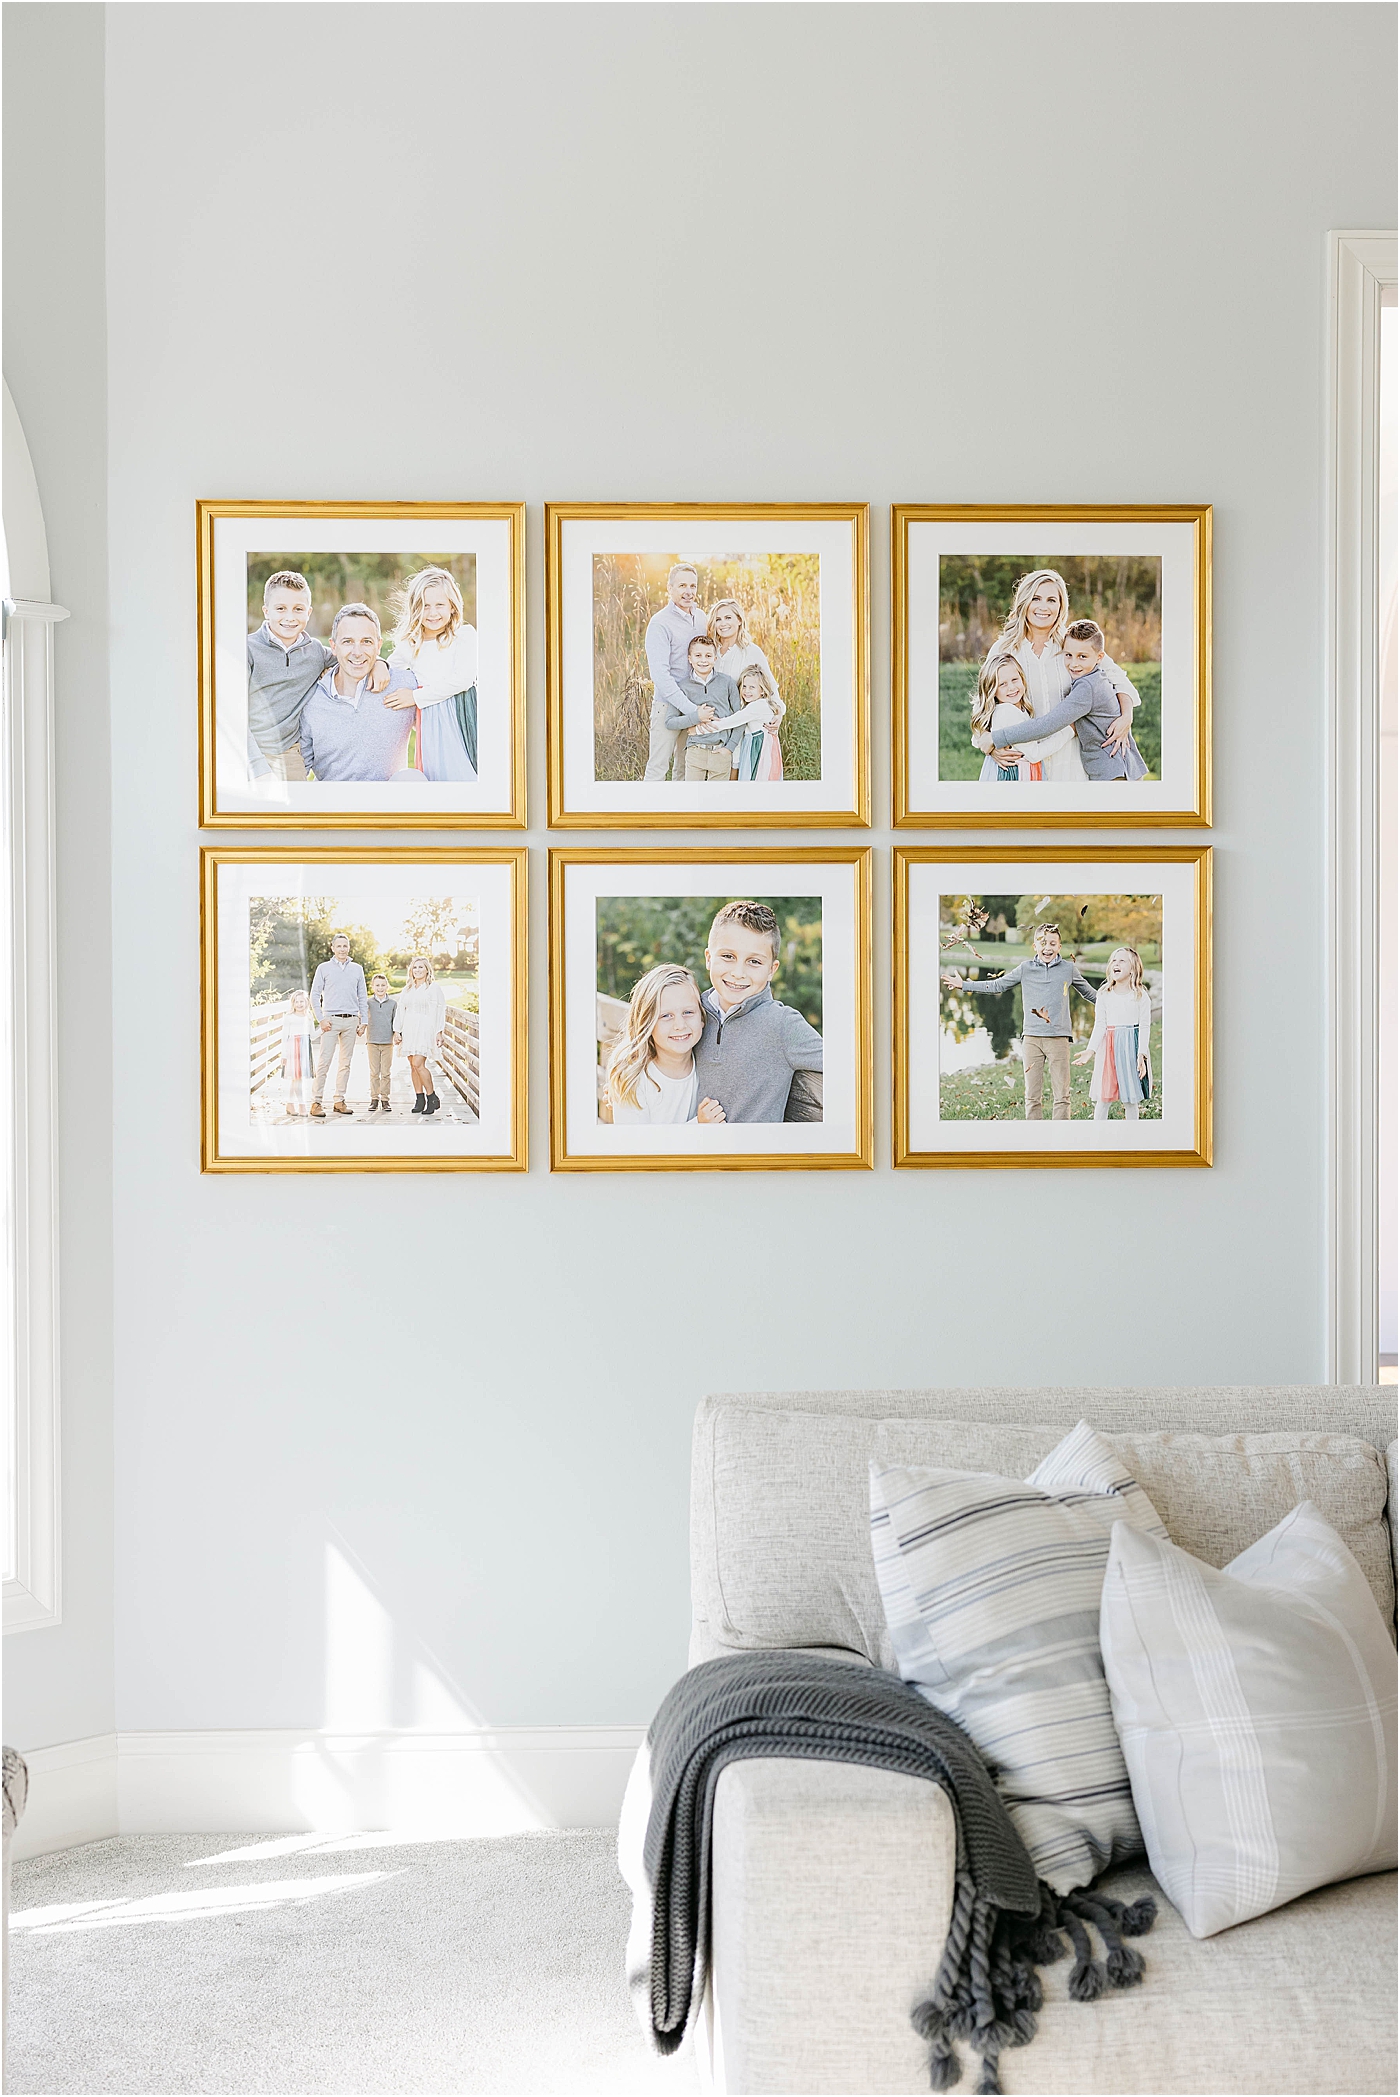 Custom-designed wall gallery of family portraits for living room | Lindsay Konopa Photography